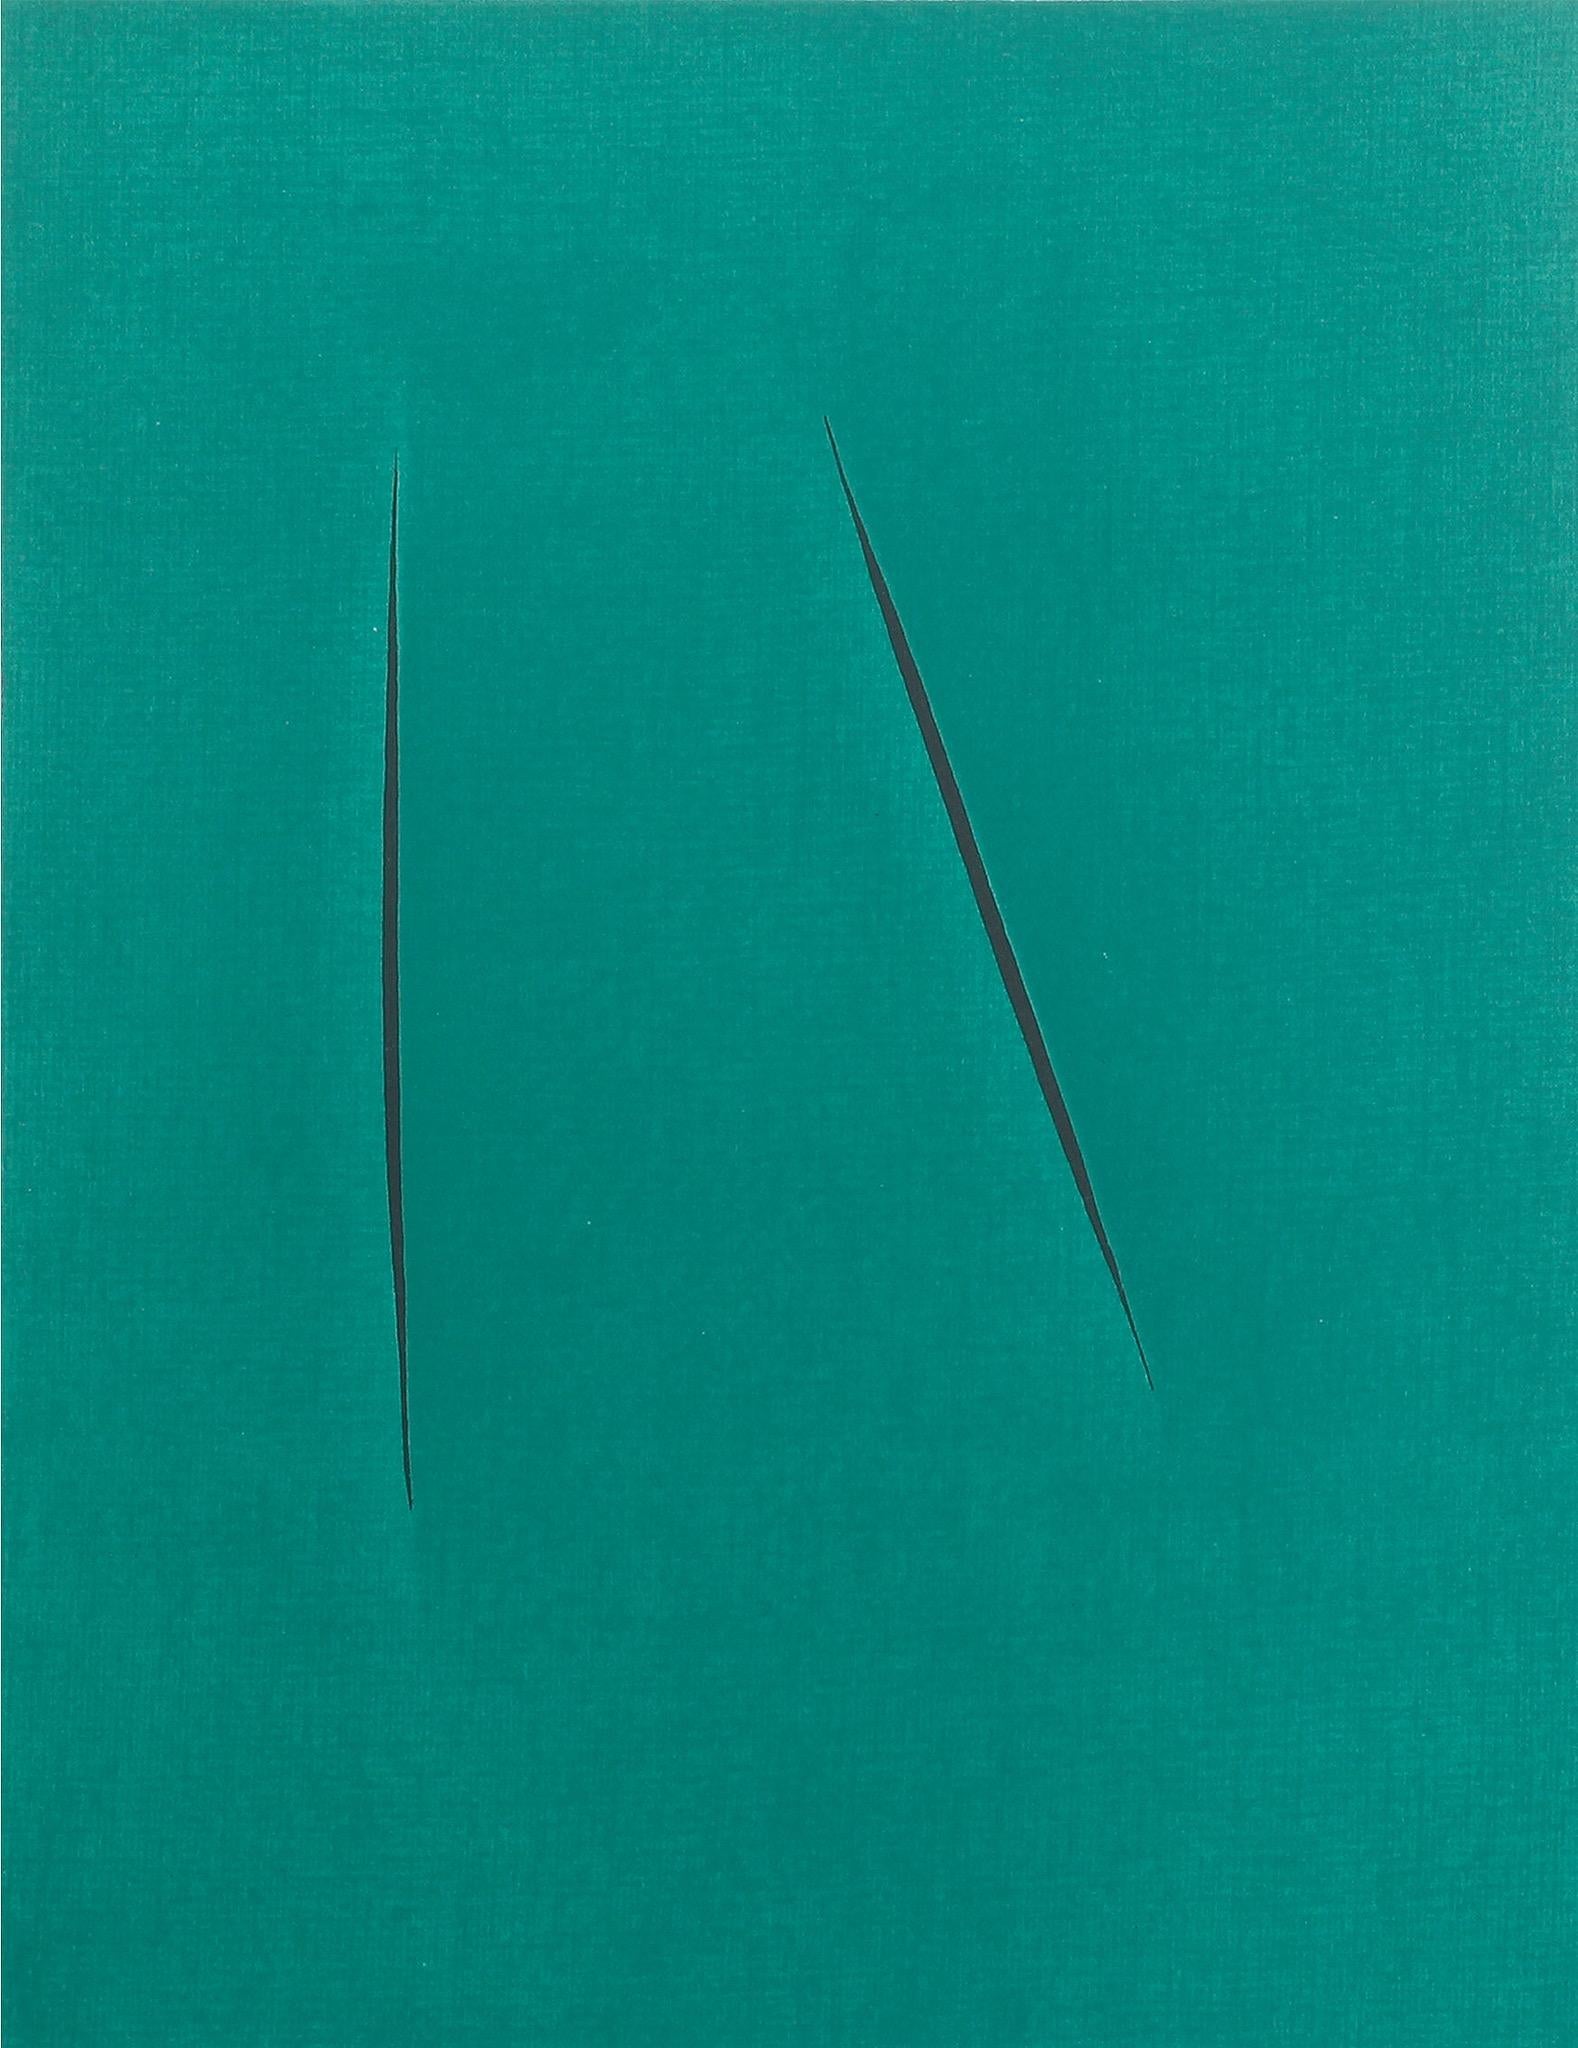 Lucio Fontana Abstract Print - Untitled, Limited Edition Lithograph